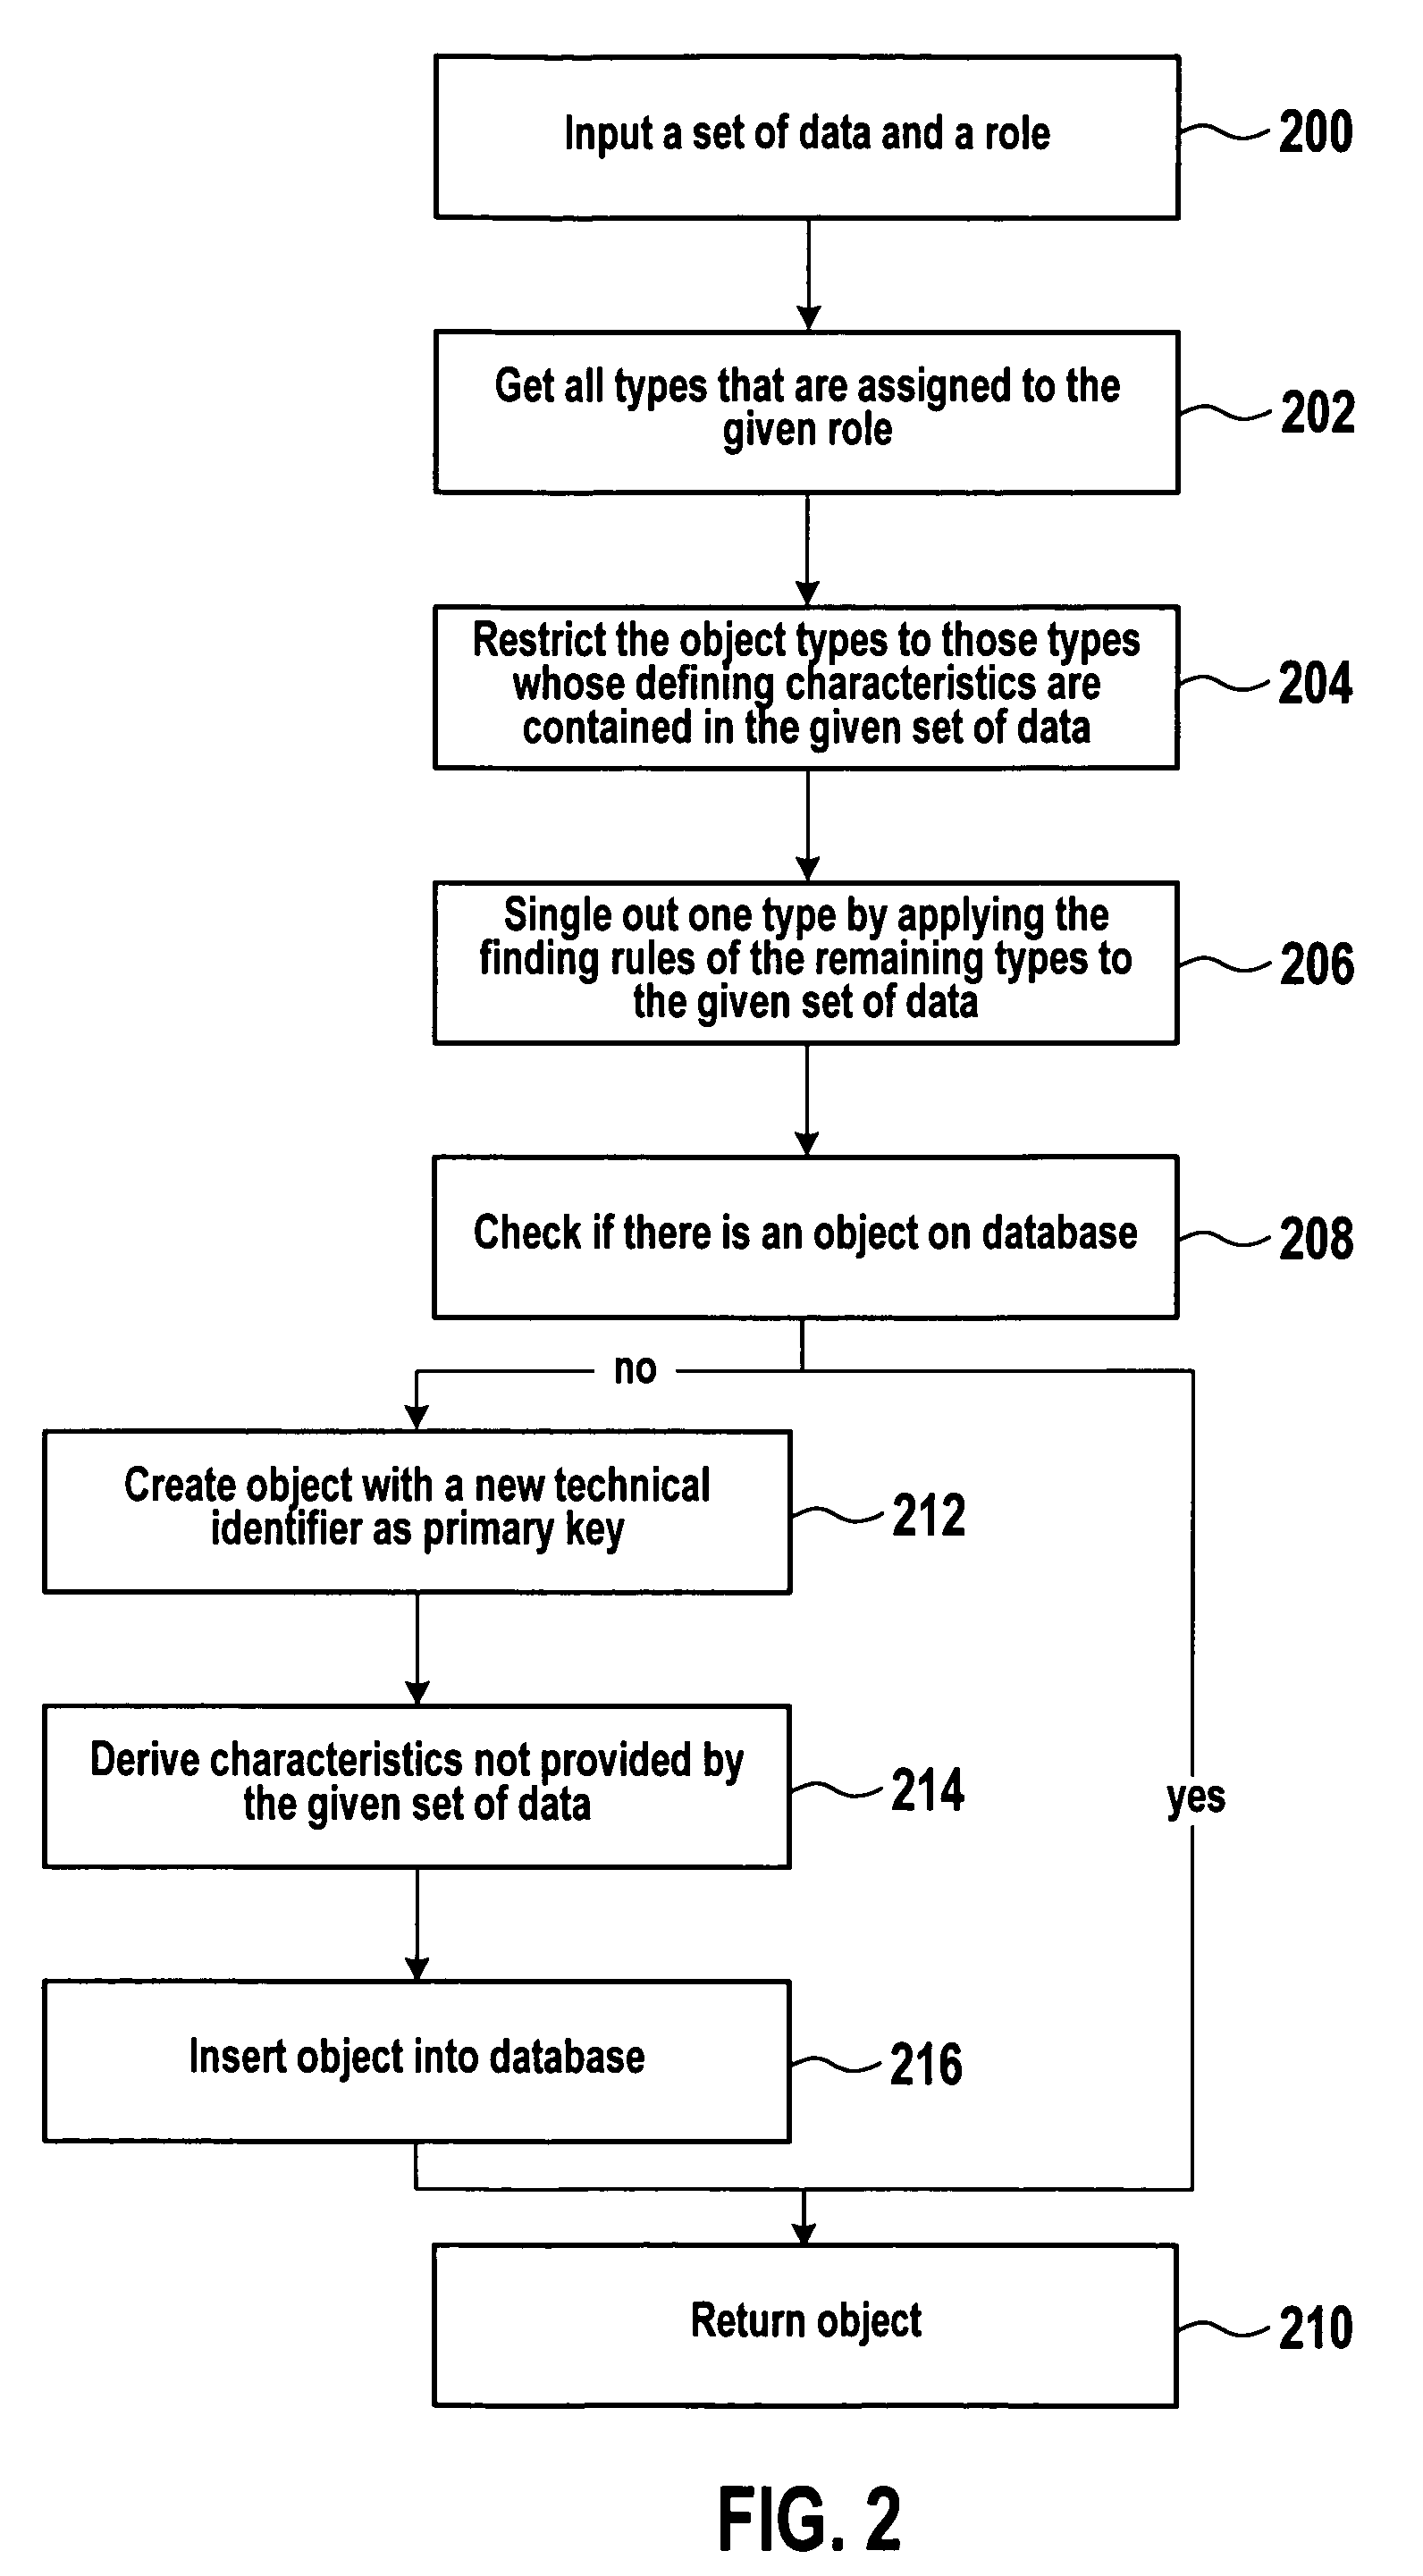 Computer systems, methods and programs for providing uniform access to configurable objects derived from disparate sources